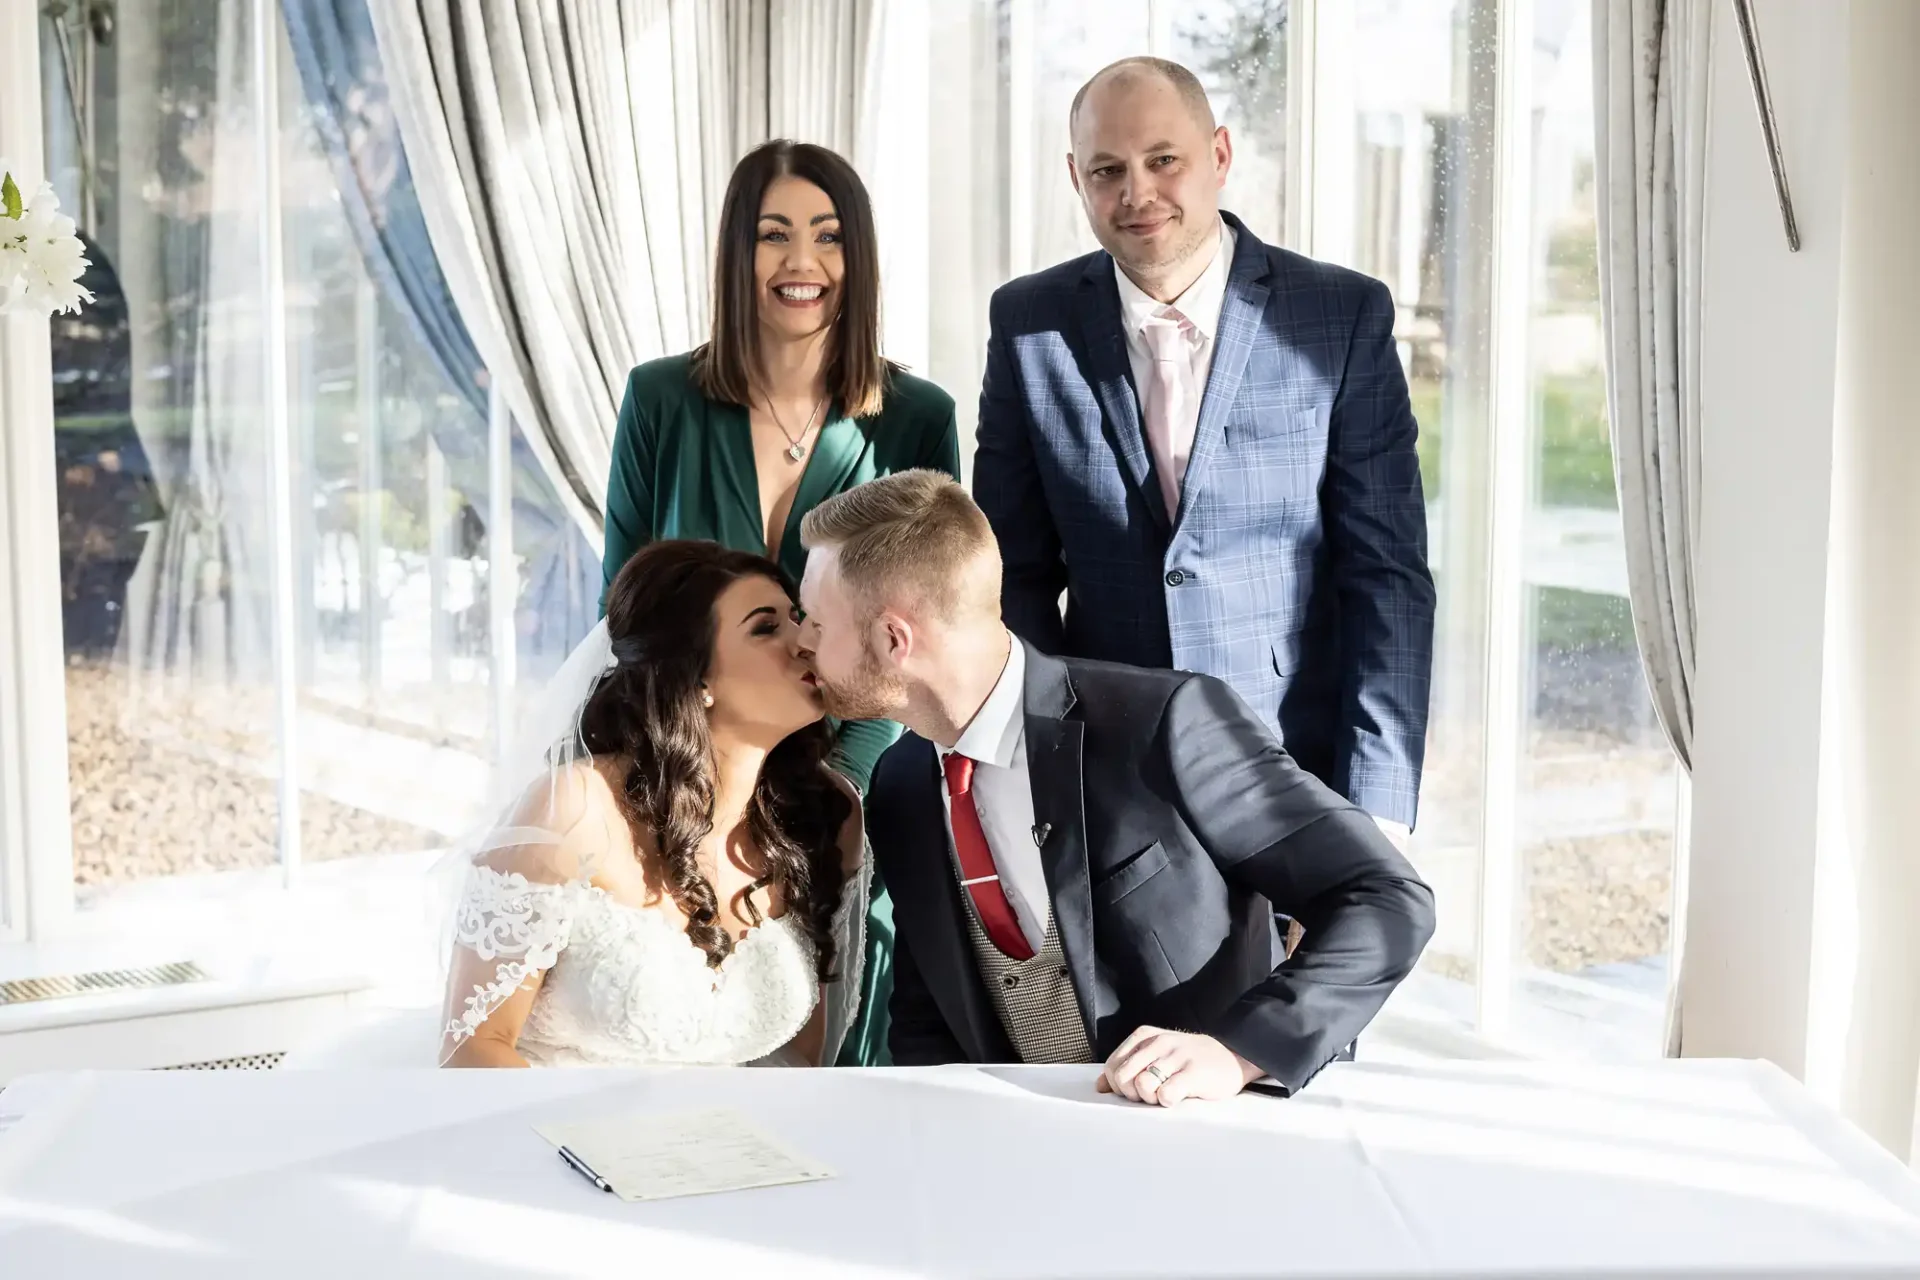 A bride in a white dress kisses a groom in a suit at a signing table during a wedding ceremony, with a smiling officiant standing behind them.